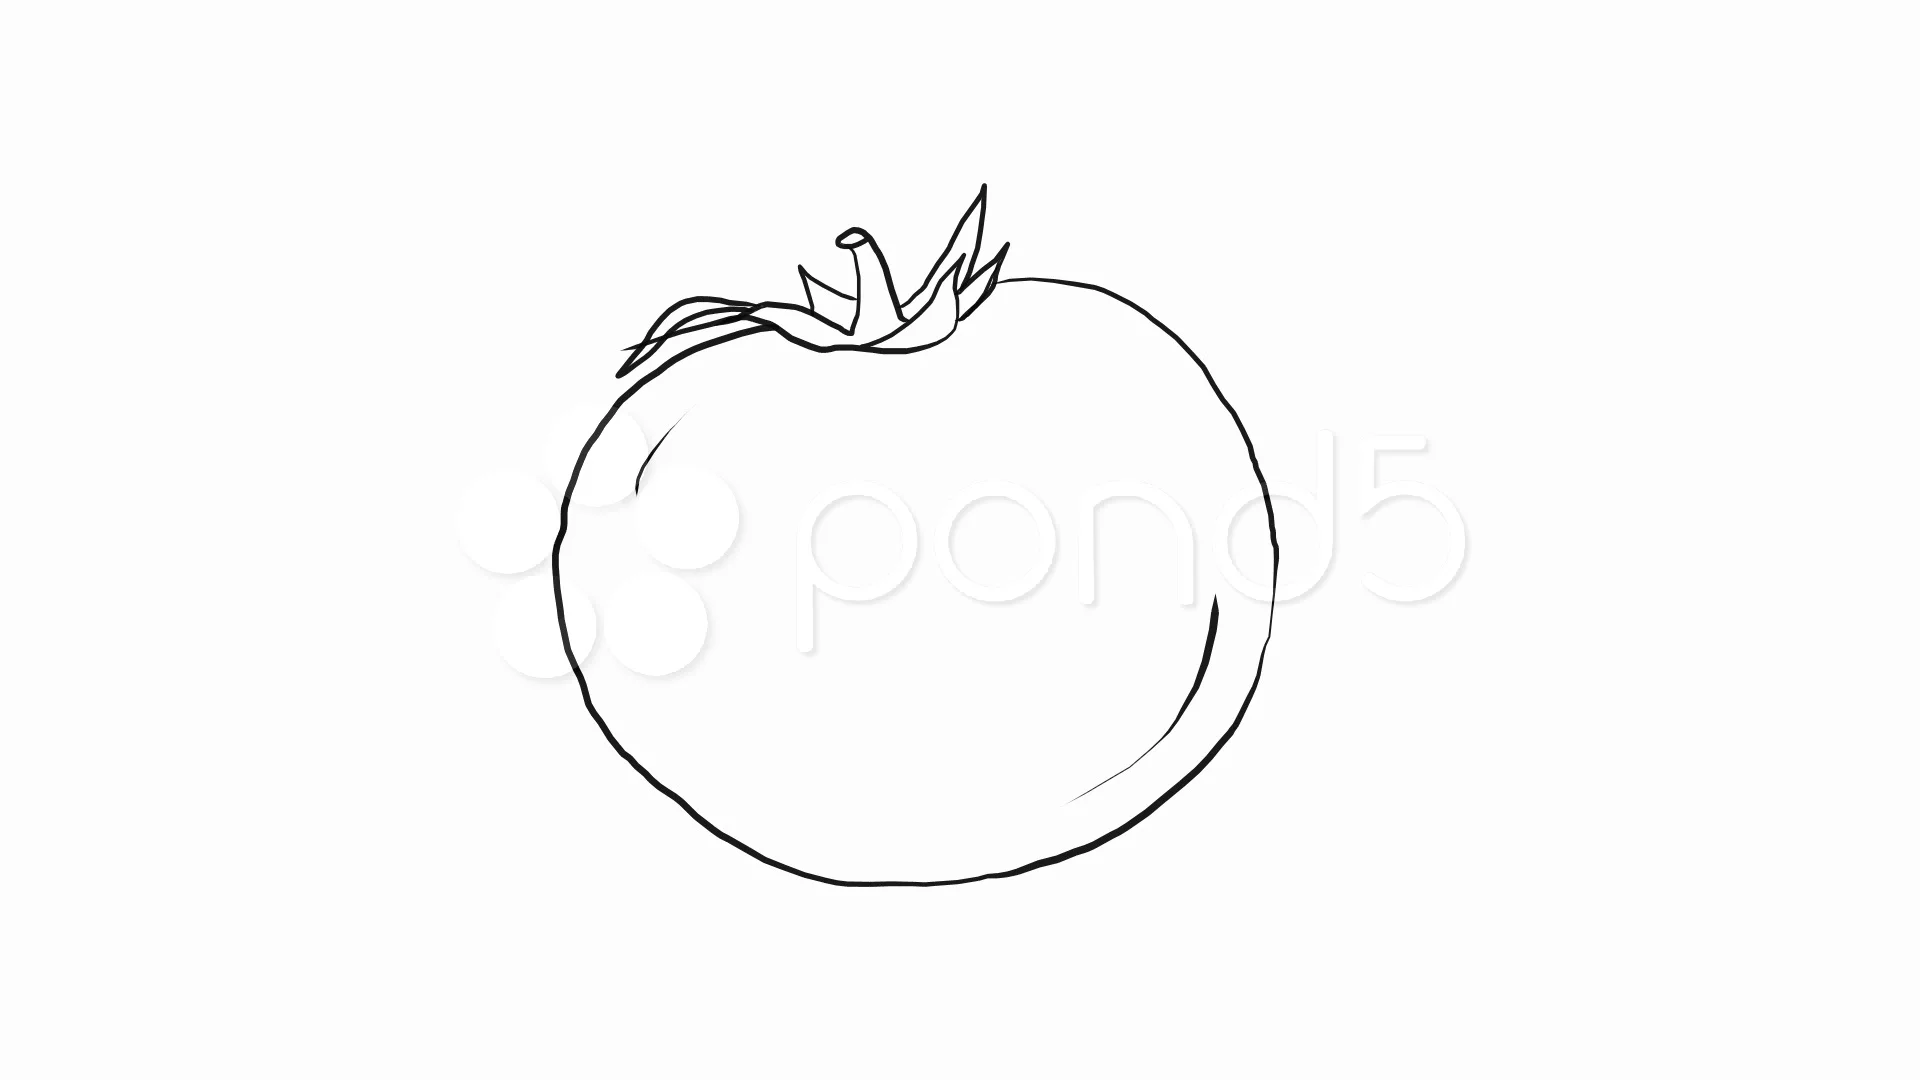 Black And White Tomato Drawing Images  Free Photos PNG Stickers  Wallpapers  Backgrounds  rawpixel